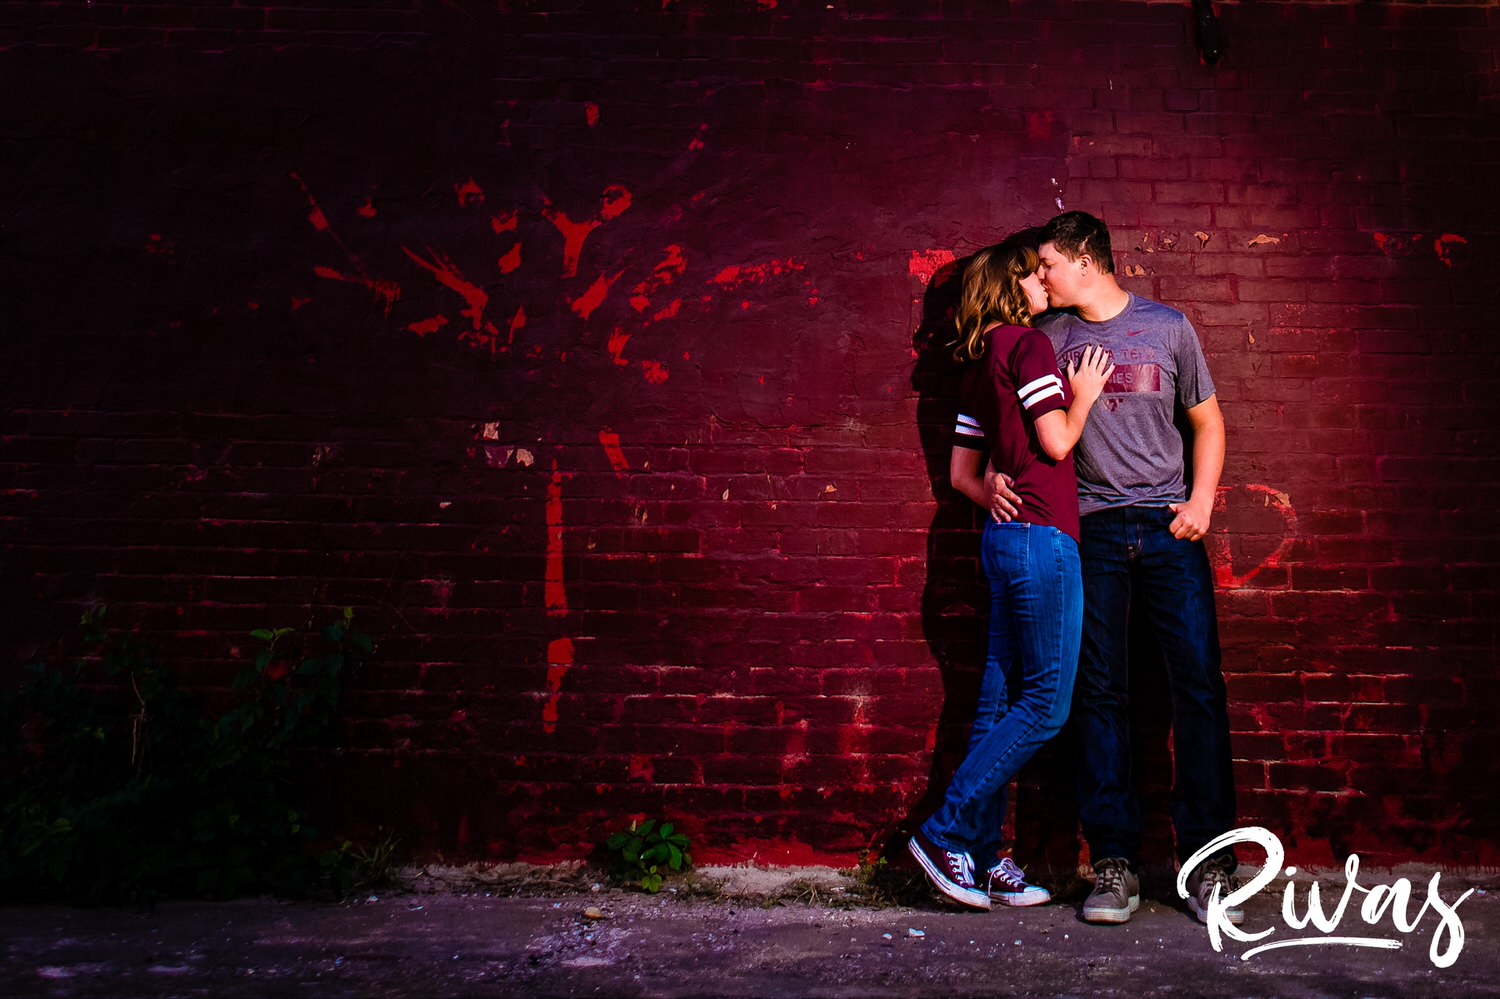 West Bottoms Engagement Session | A dramatic photo of an engaged couple standing outside a brick building in the West Bottoms Neighborhood of Kansas City.